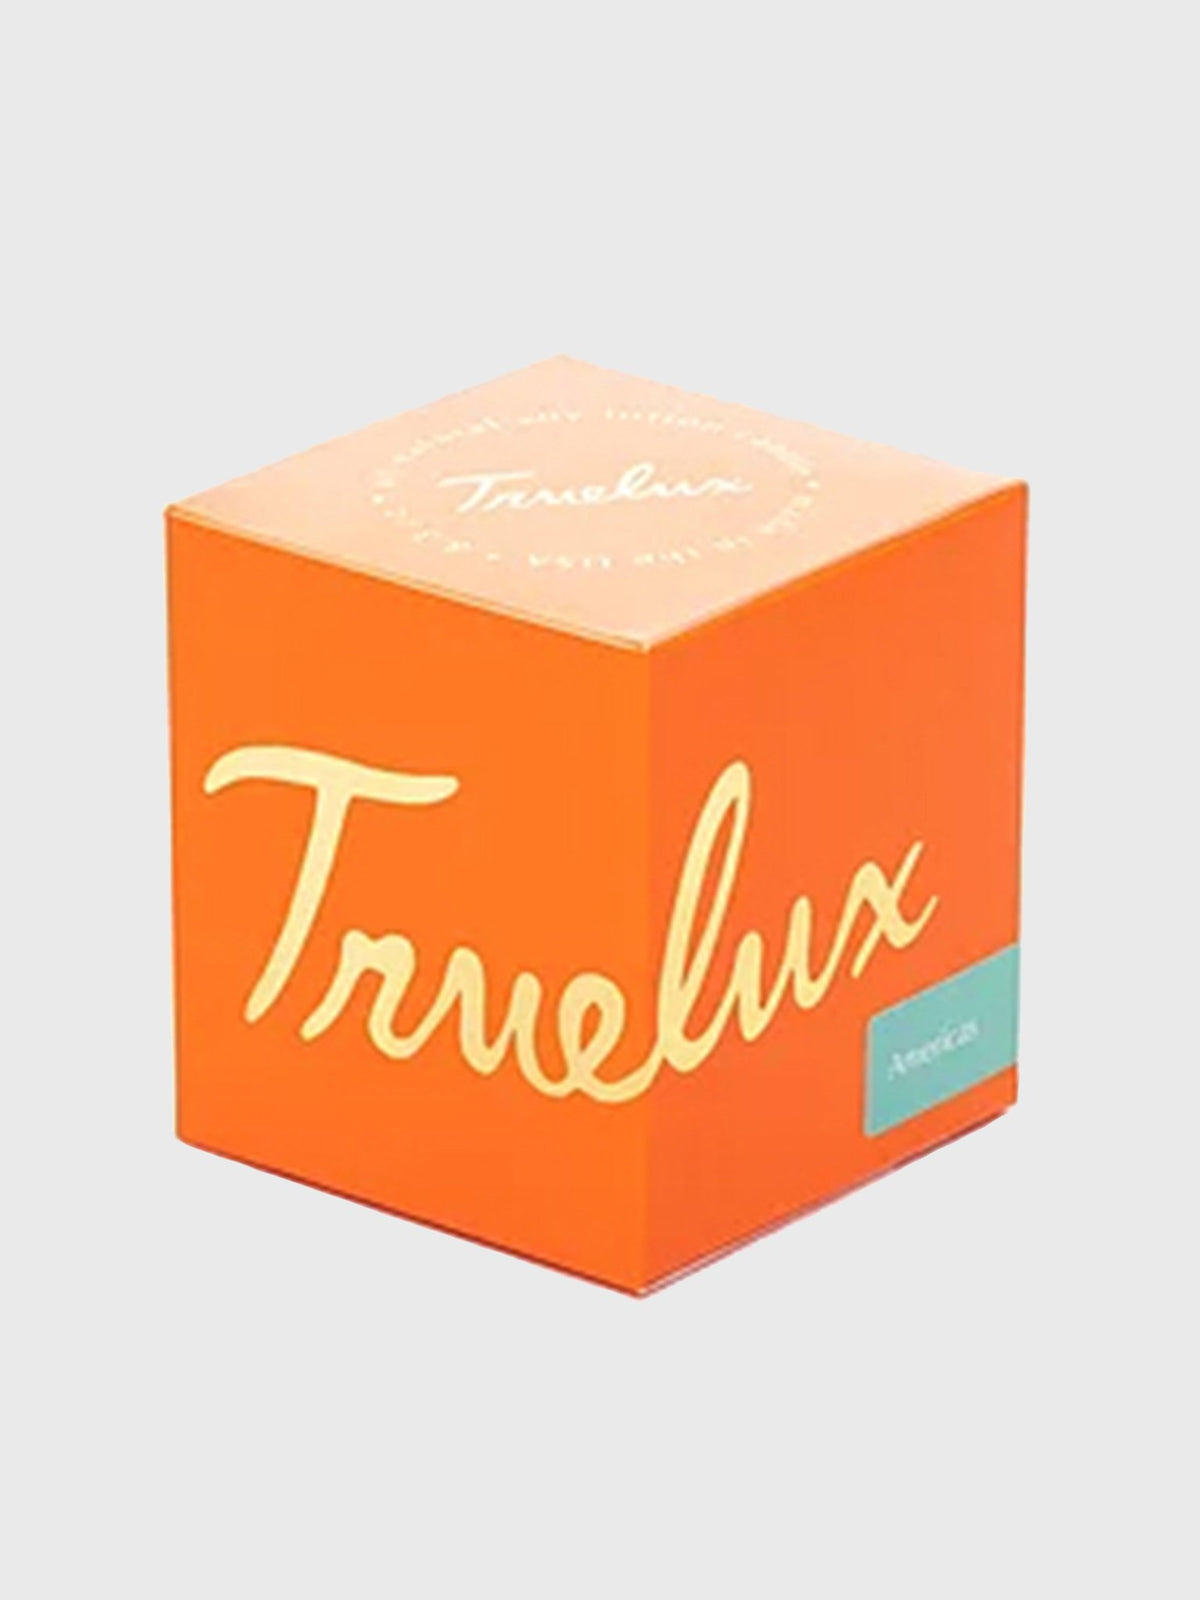 Truelux Lotion Candle - Americas